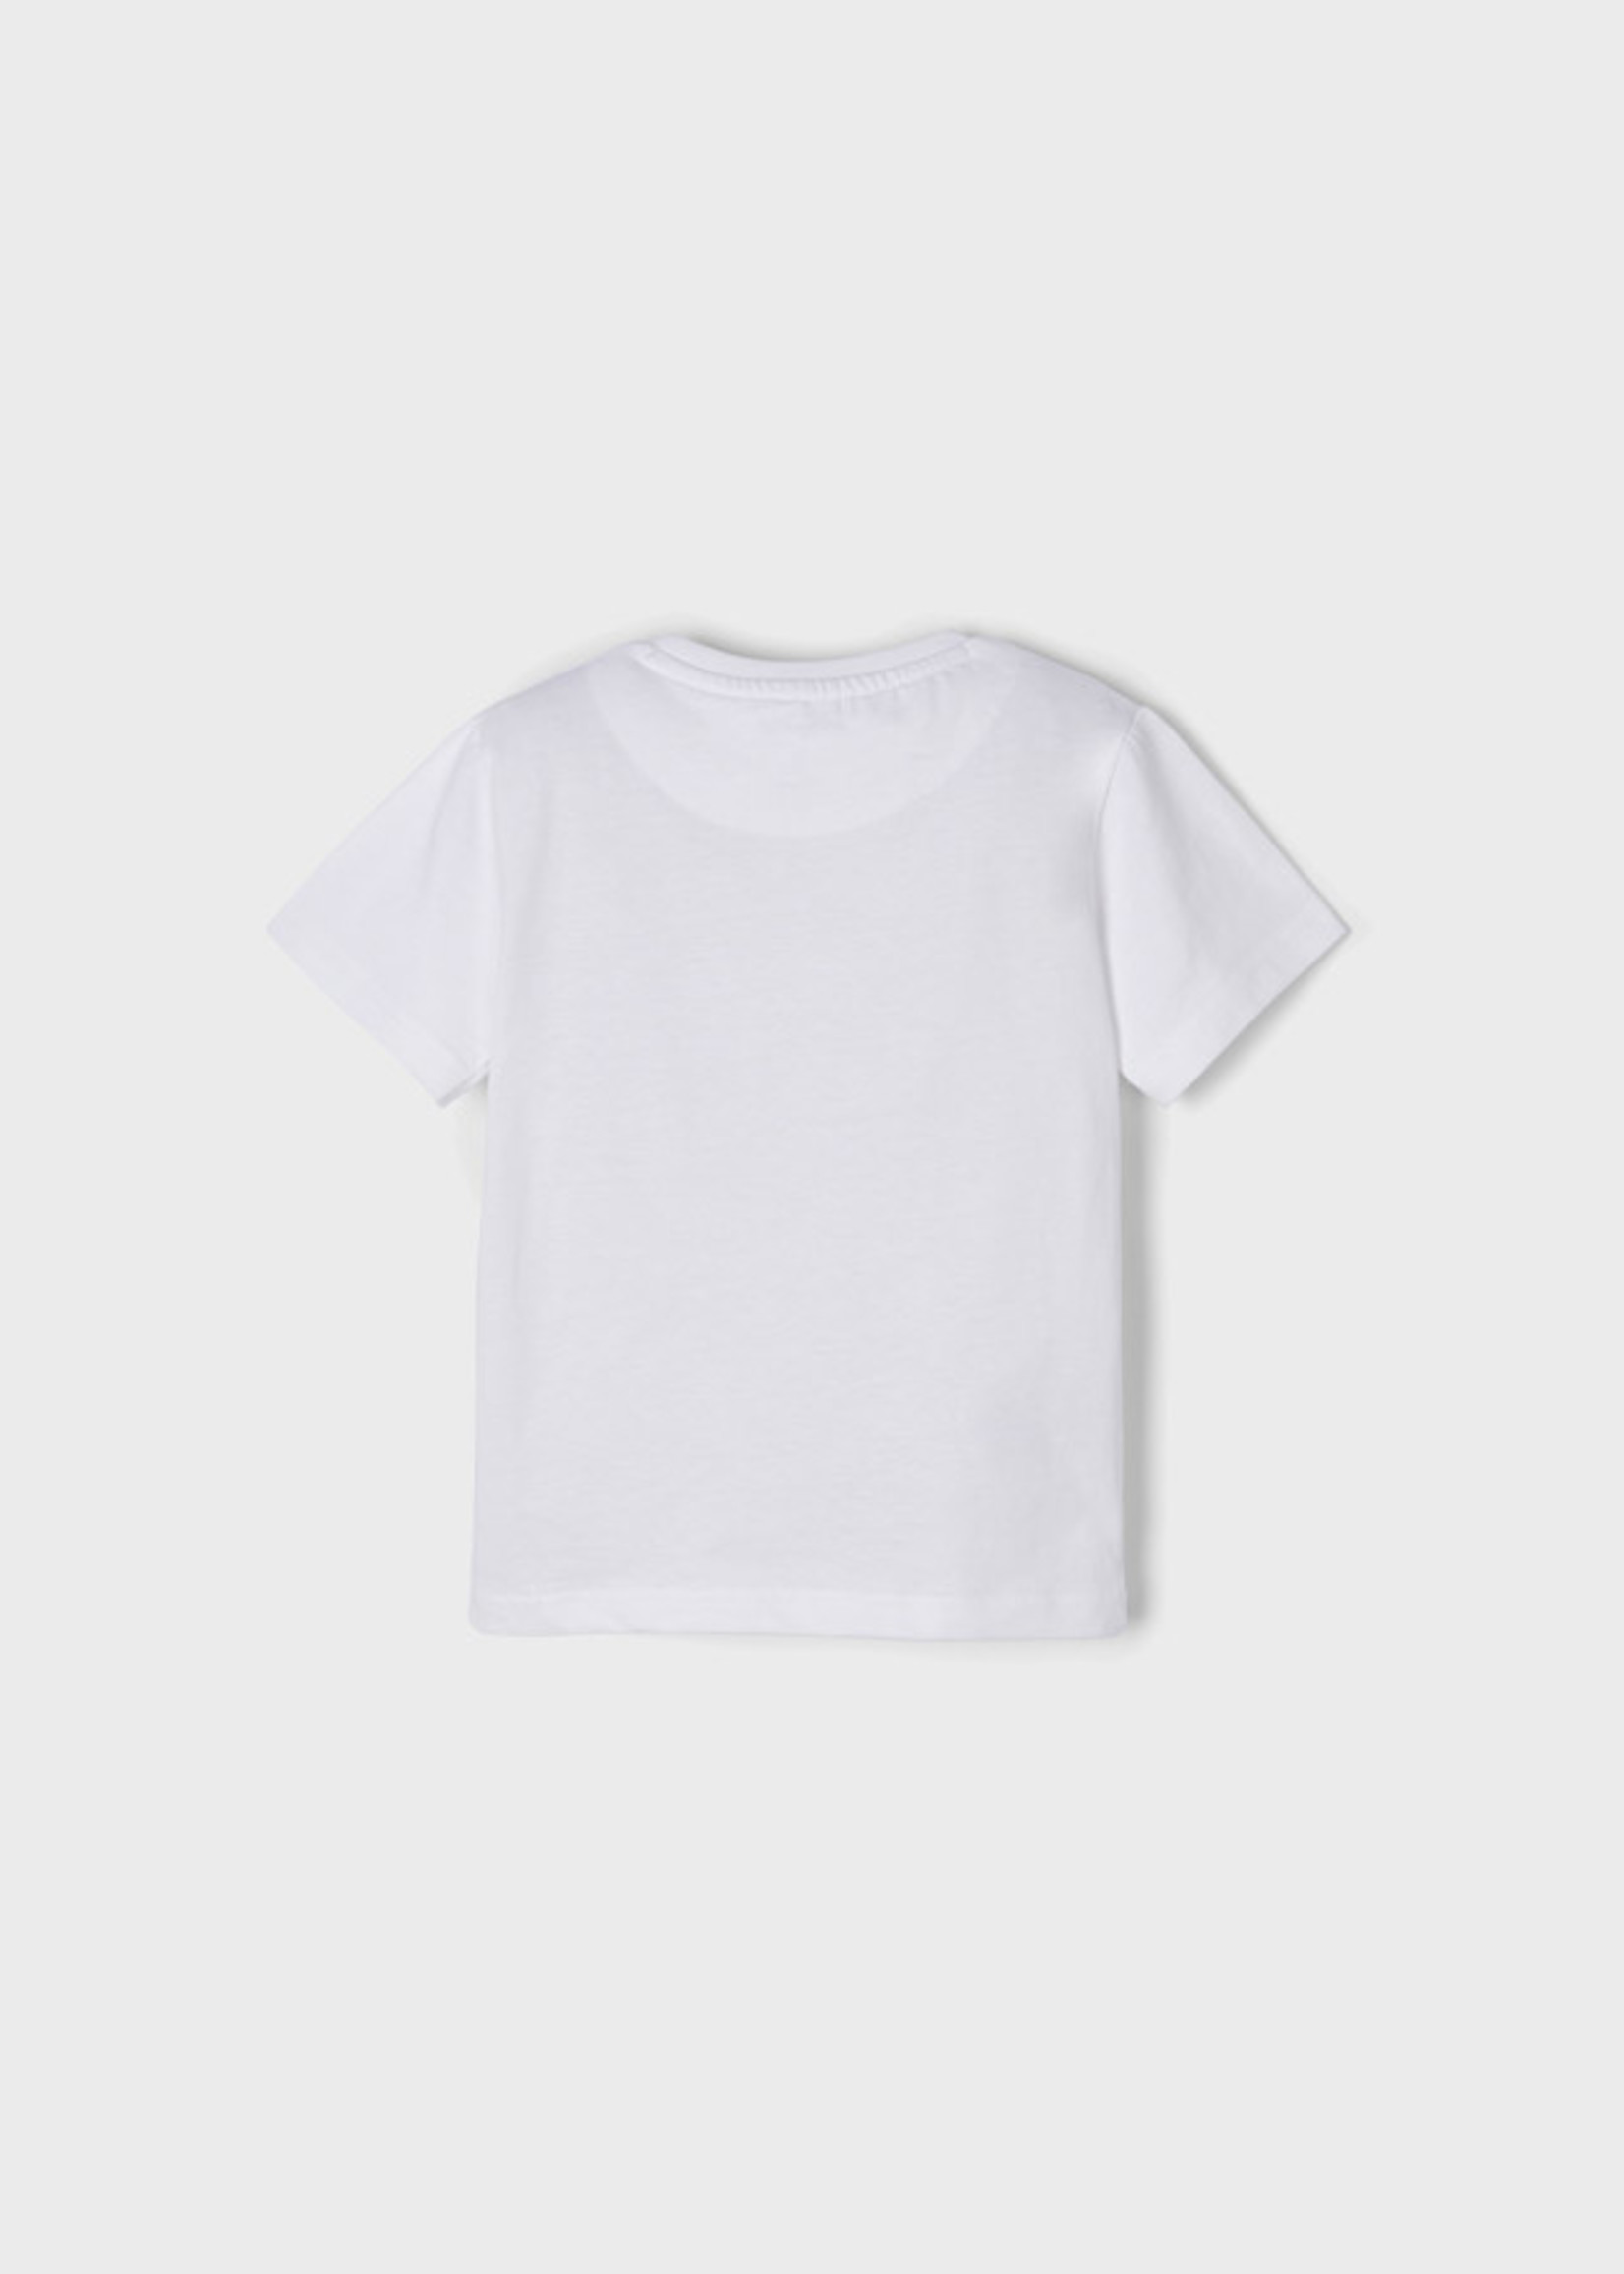 Mayoral S/s t-shirt                   White      3011